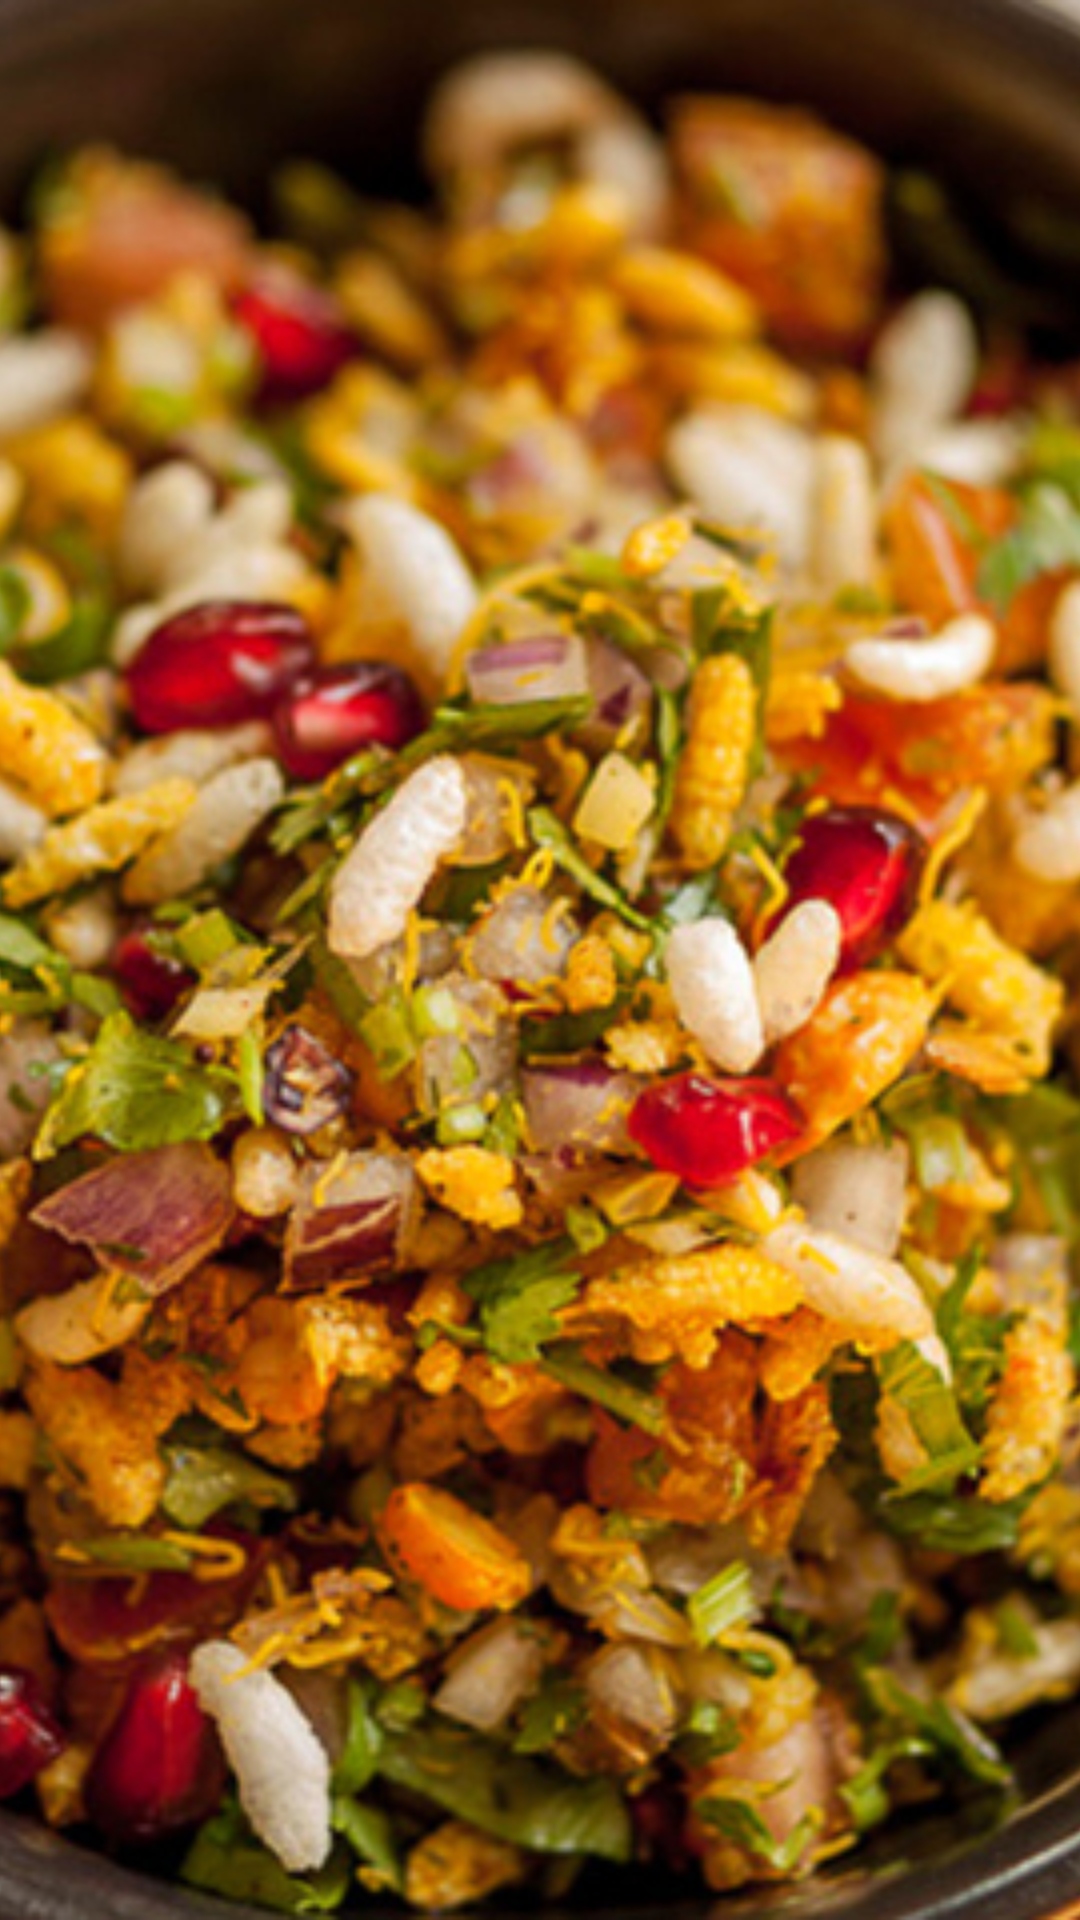 7 types of bhel puri you must try